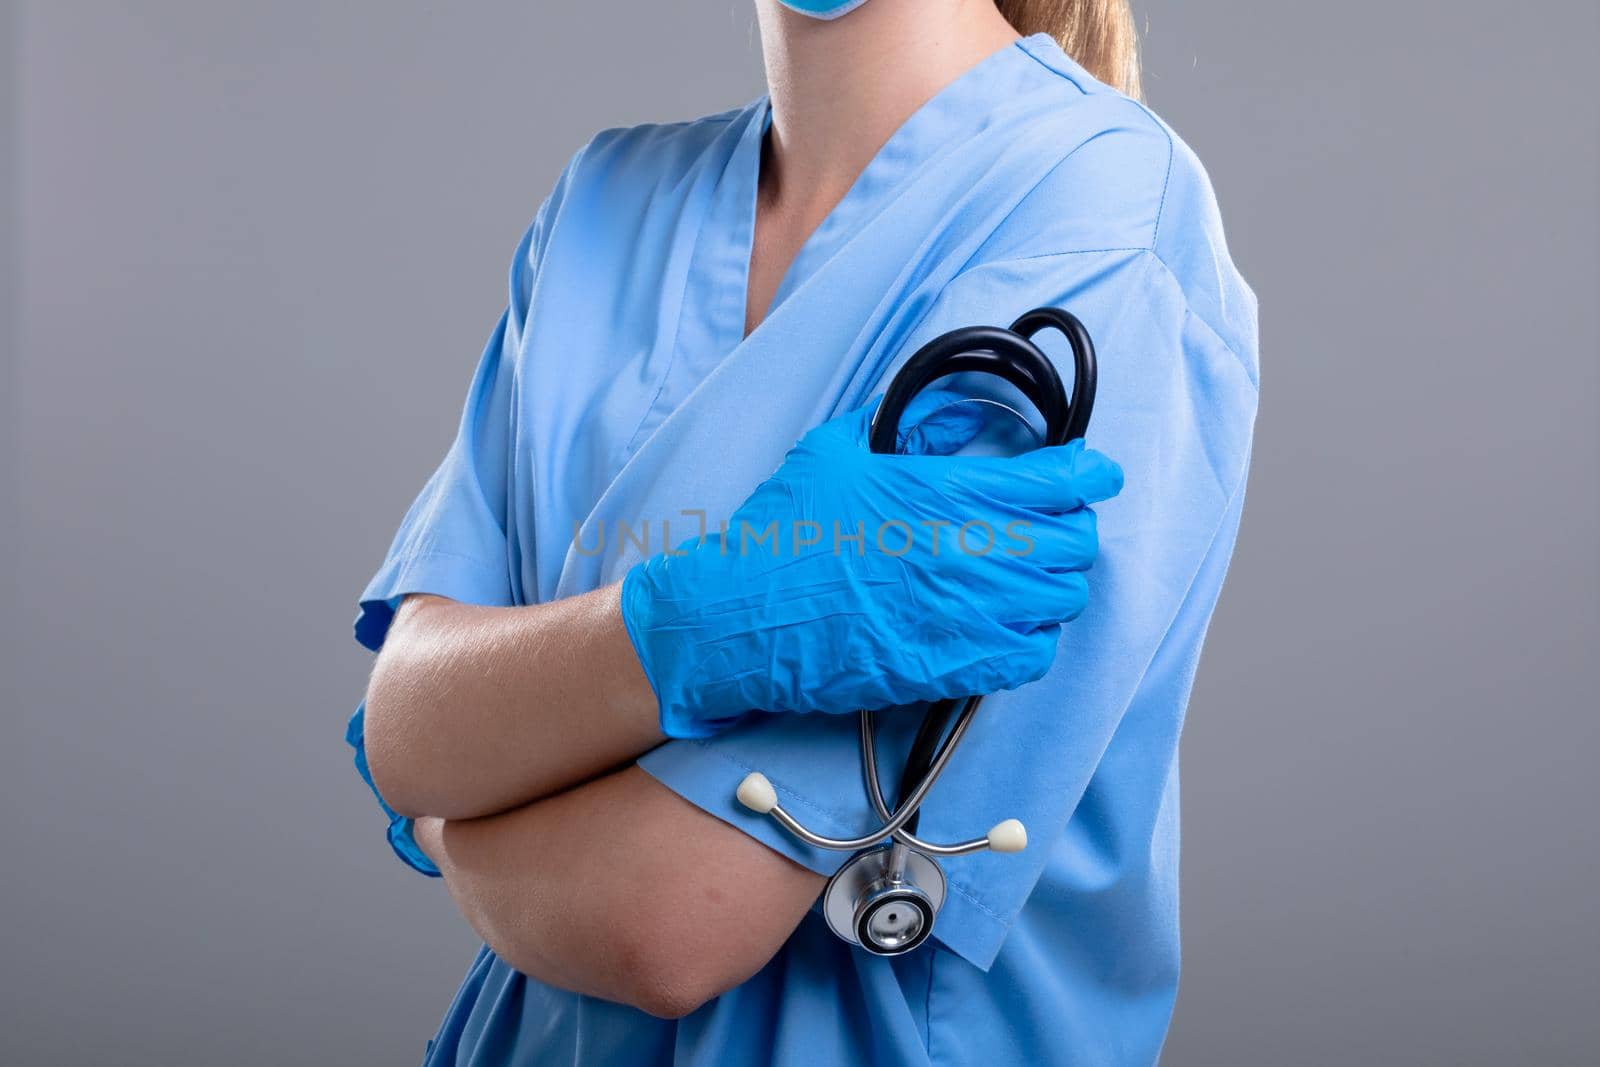 Midsection of caucasian female doctor holding stethoscope, isolated on grey background by Wavebreakmedia